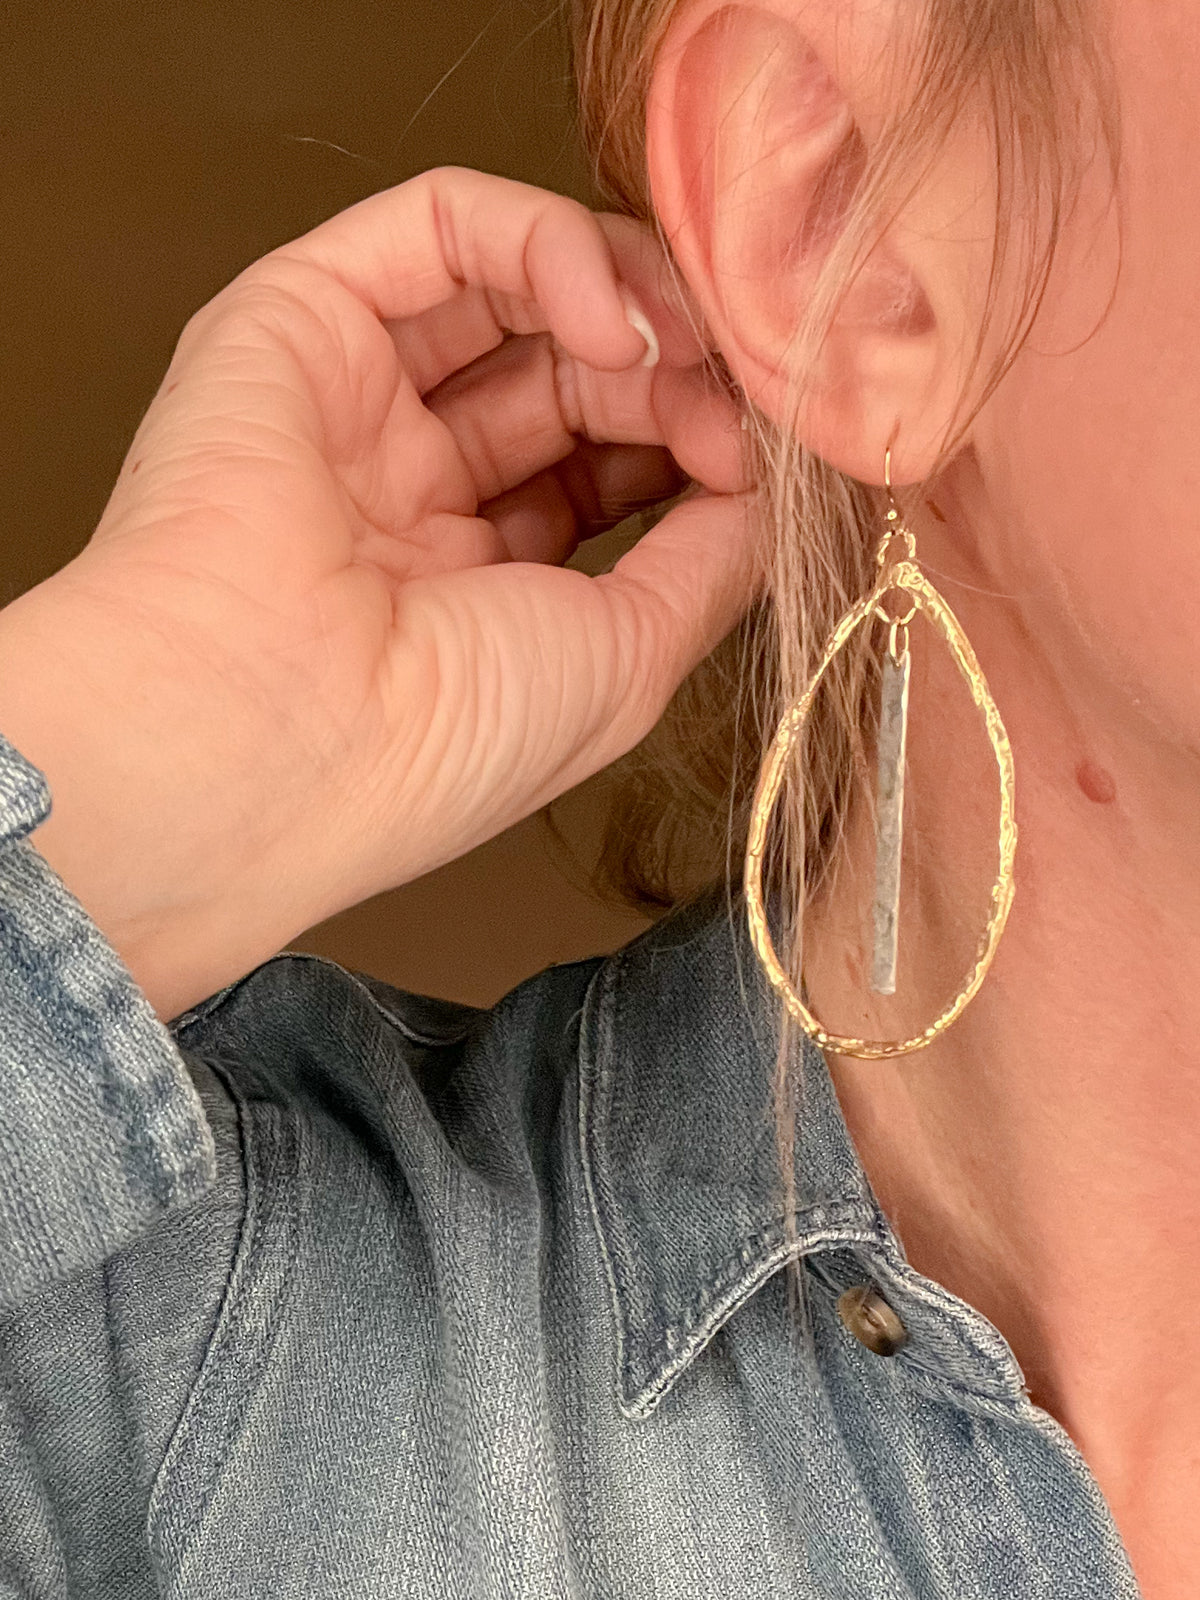 Indulge in the exquisite artistry of these teardrop hoops, handcrafted with hammered Gold Bronze and Sterling Silver accents on Gold filled ear wires. Measuring a regal 2 3/4-inches, these earrings emanate elegance and are proudly made in the USA.